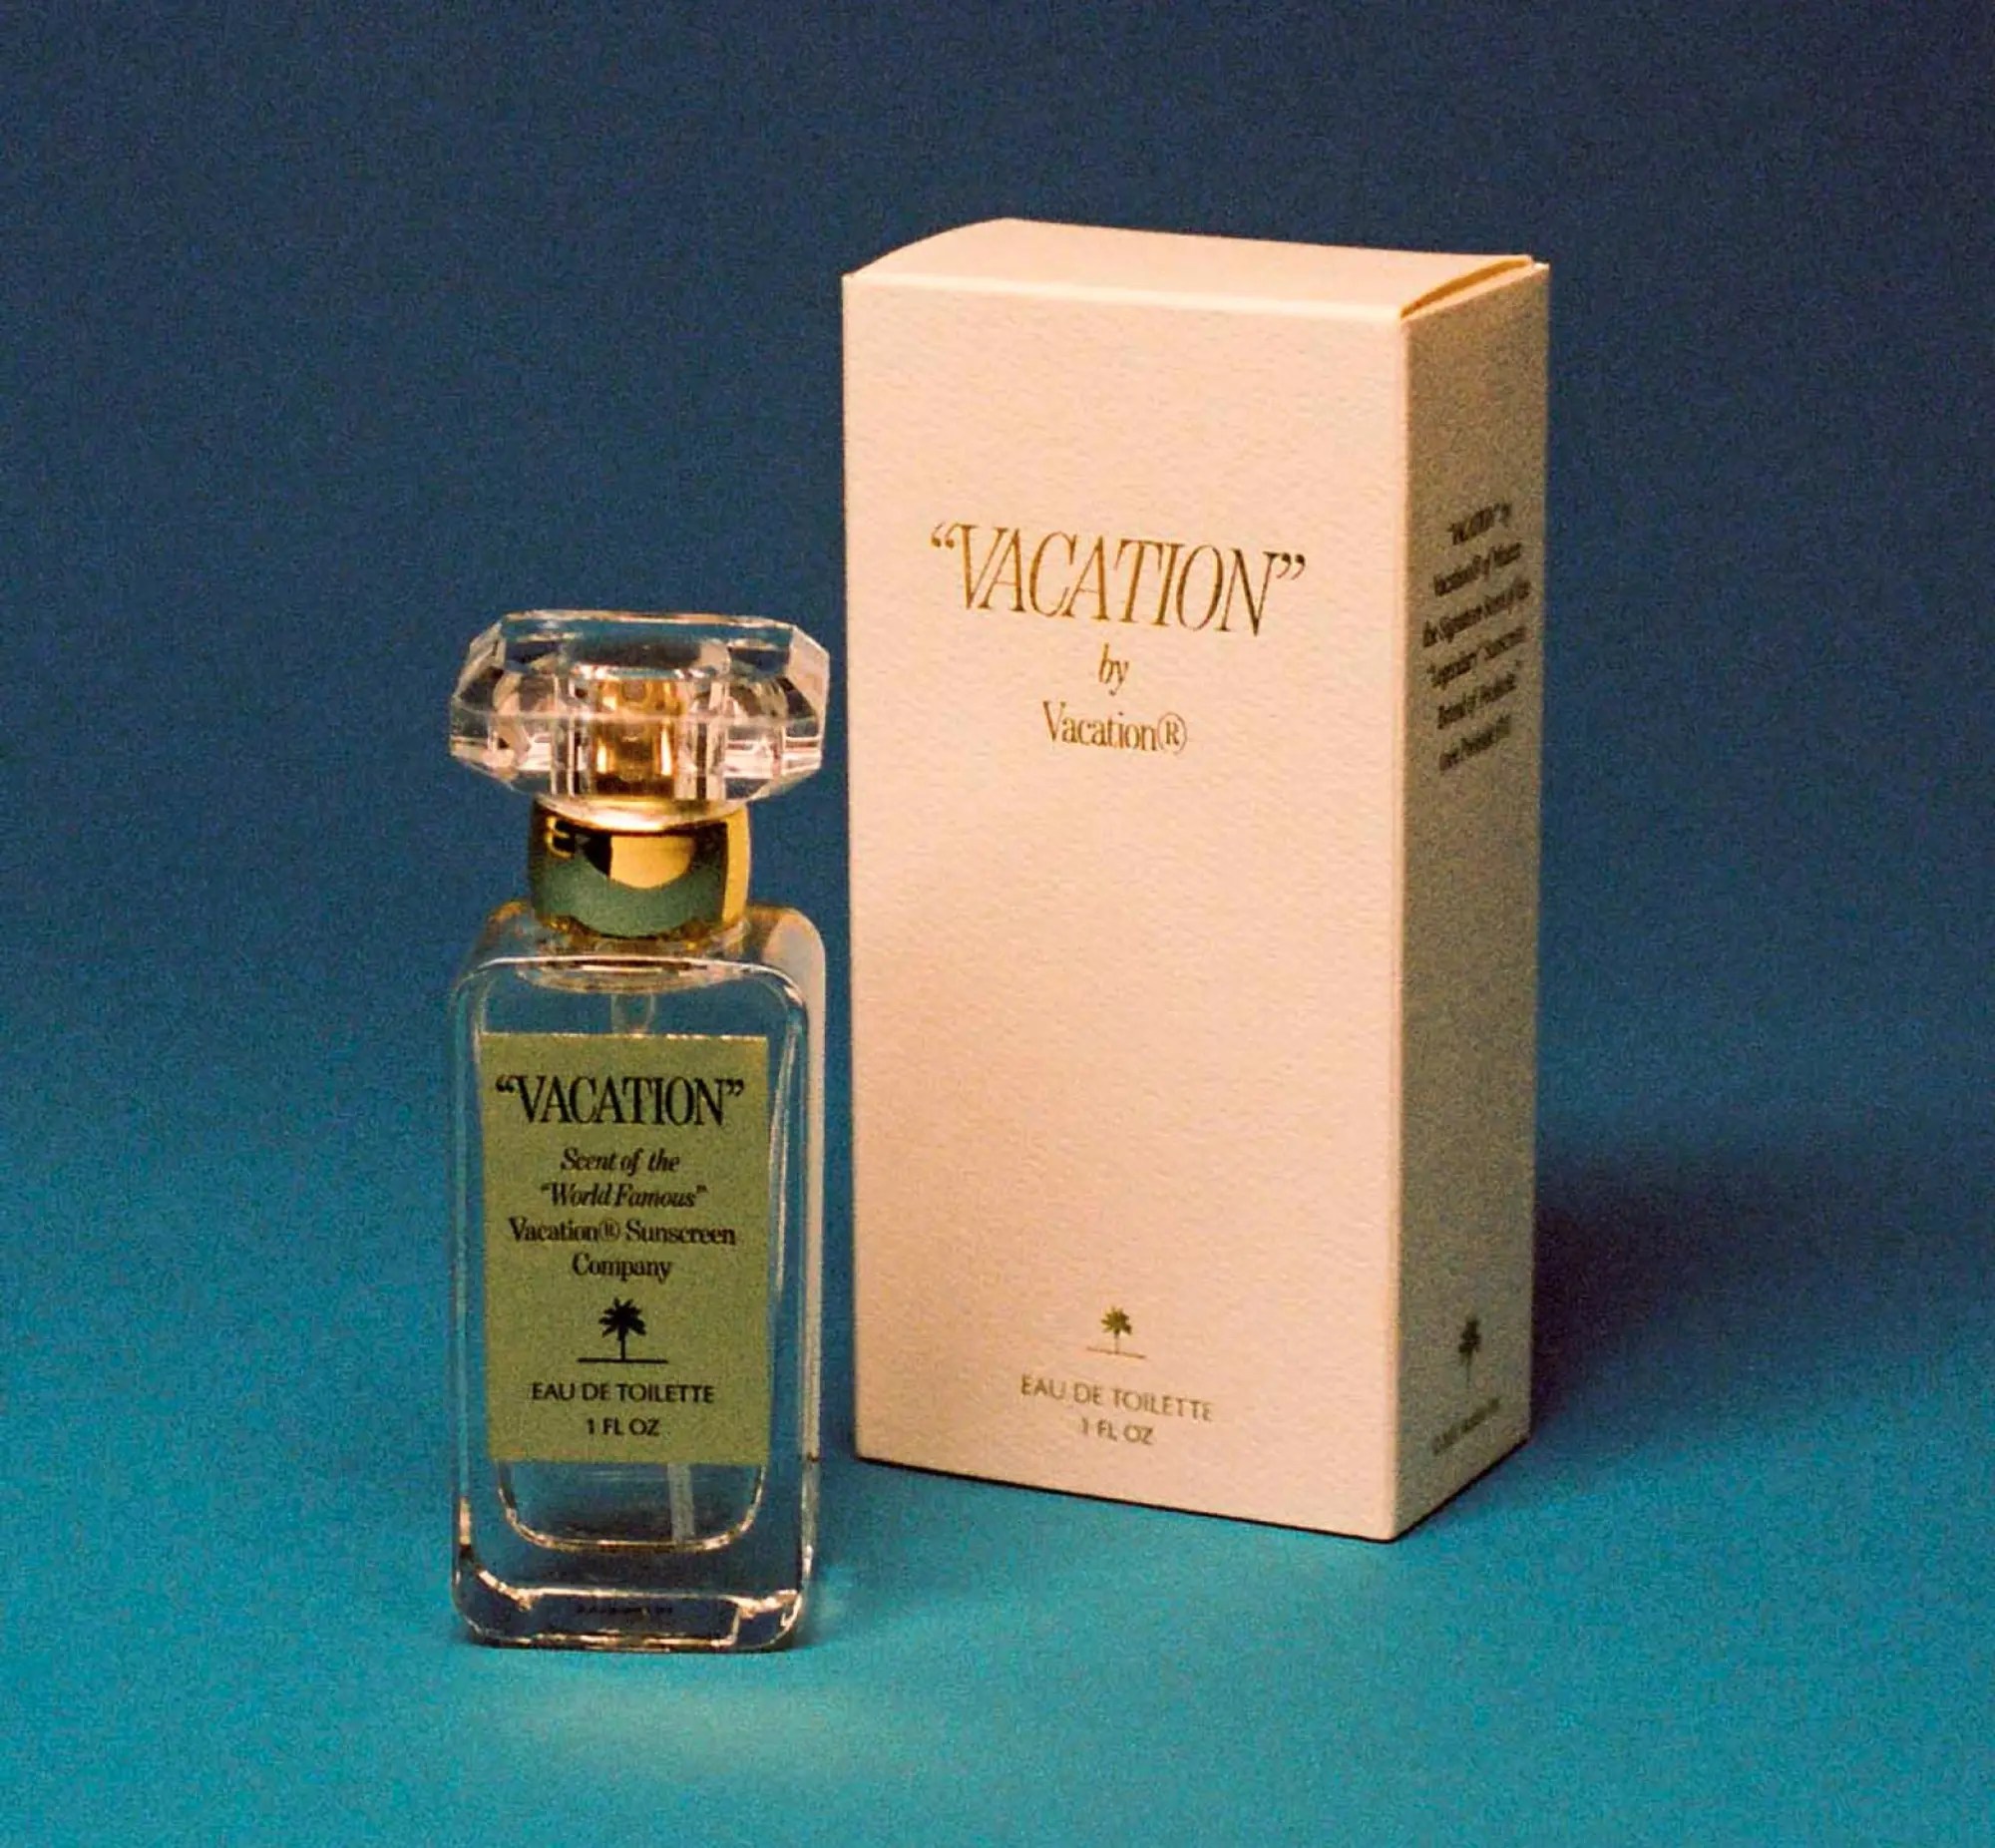 vacation inc. vacation scent bottle and box on a blue background